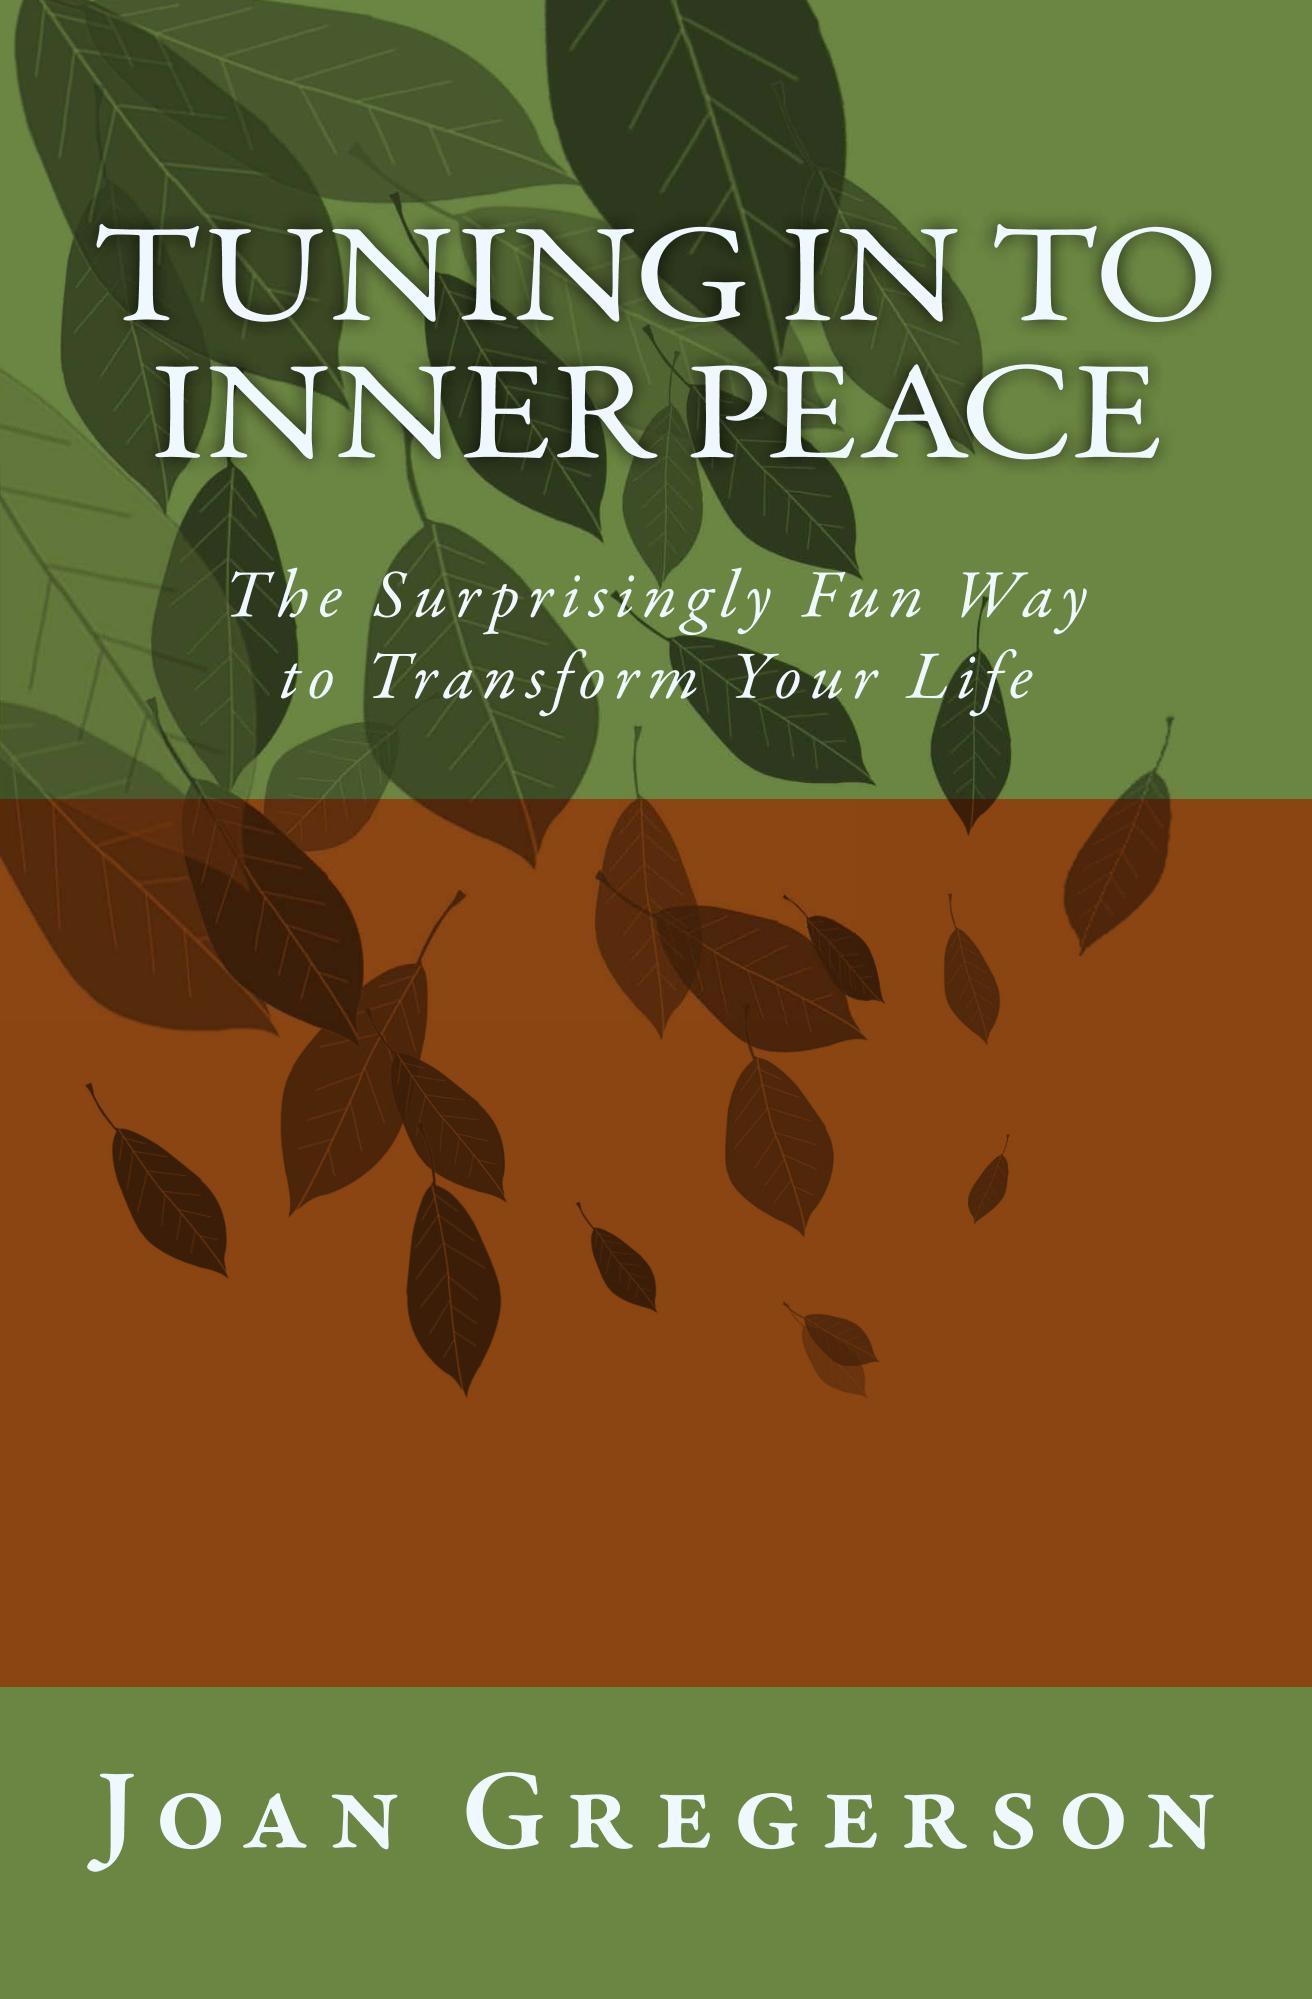 Cover for book: Tuning In to Inner Peace